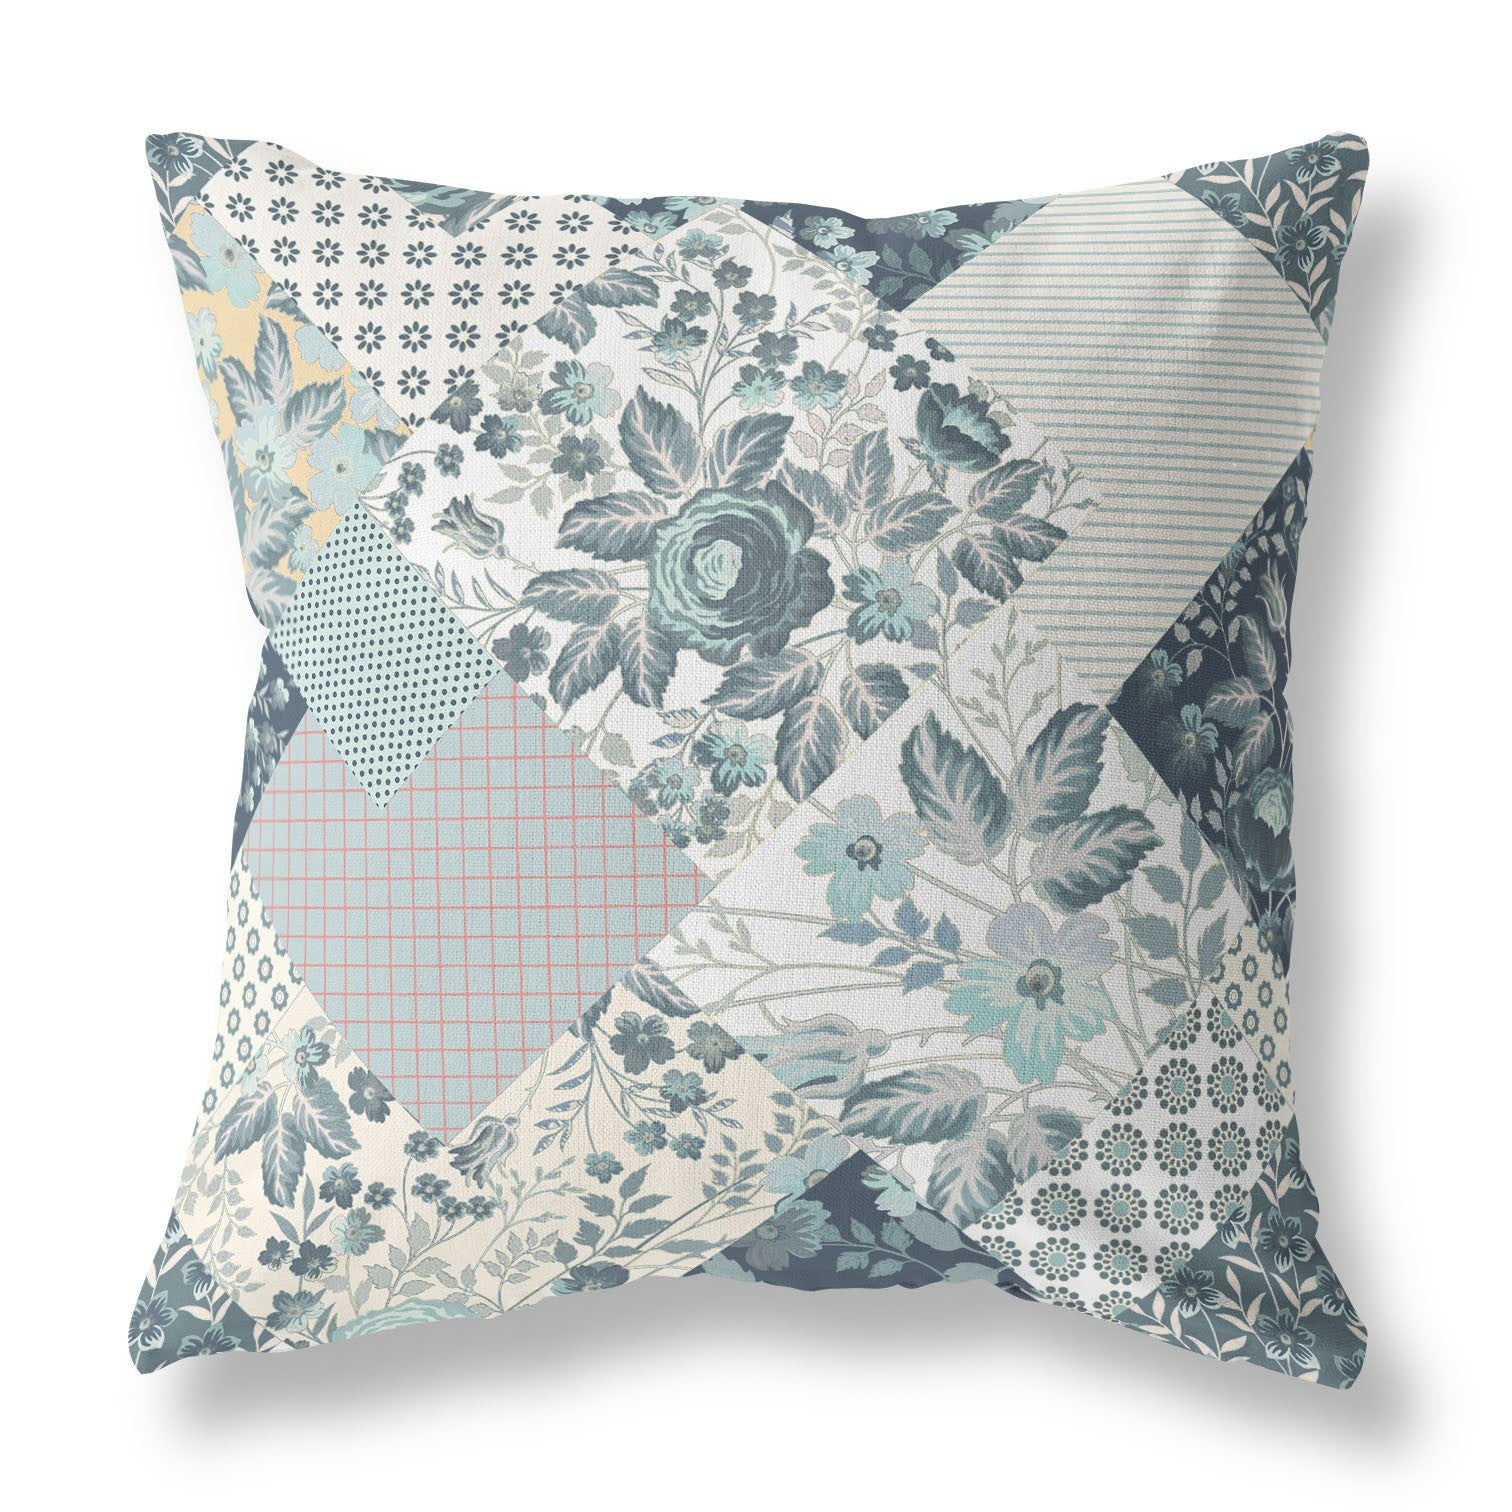 18" Teal White Boho Floral Indoor Outdoor Throw Pillow